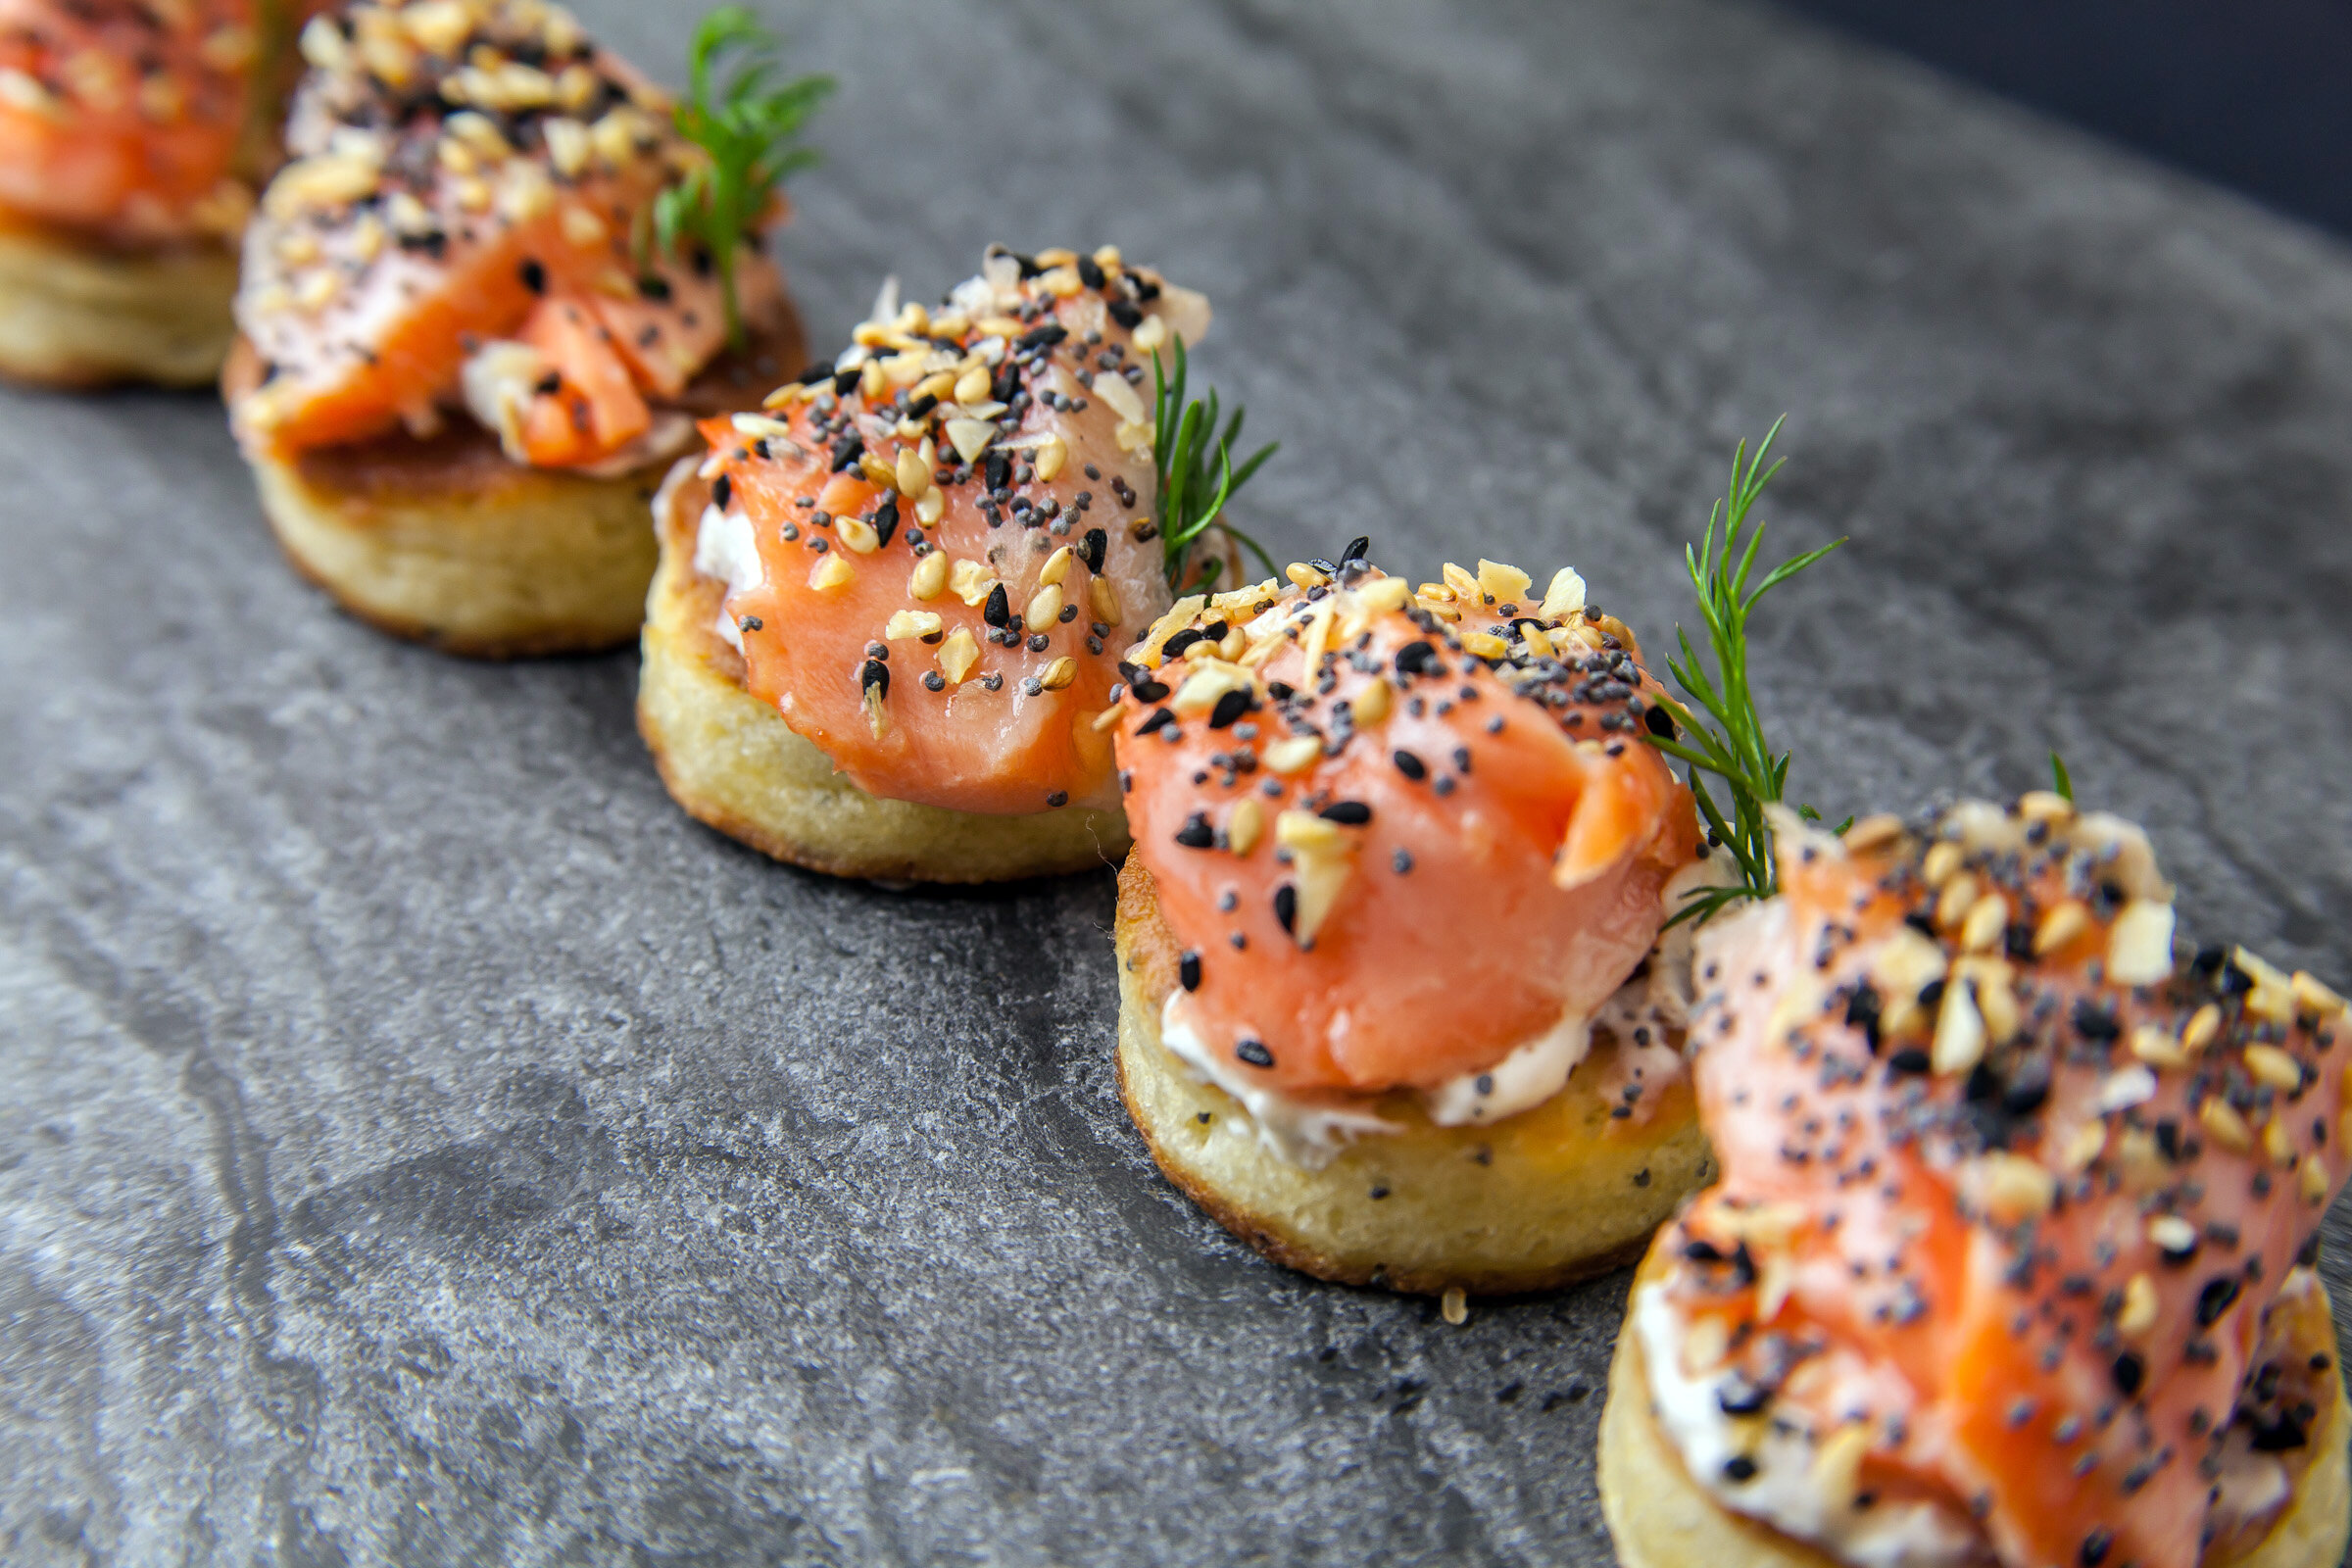  Smoked Salmon, English Muffin, Creme Fraiche, Everything Bagel Spice Hors d’Ouevre 